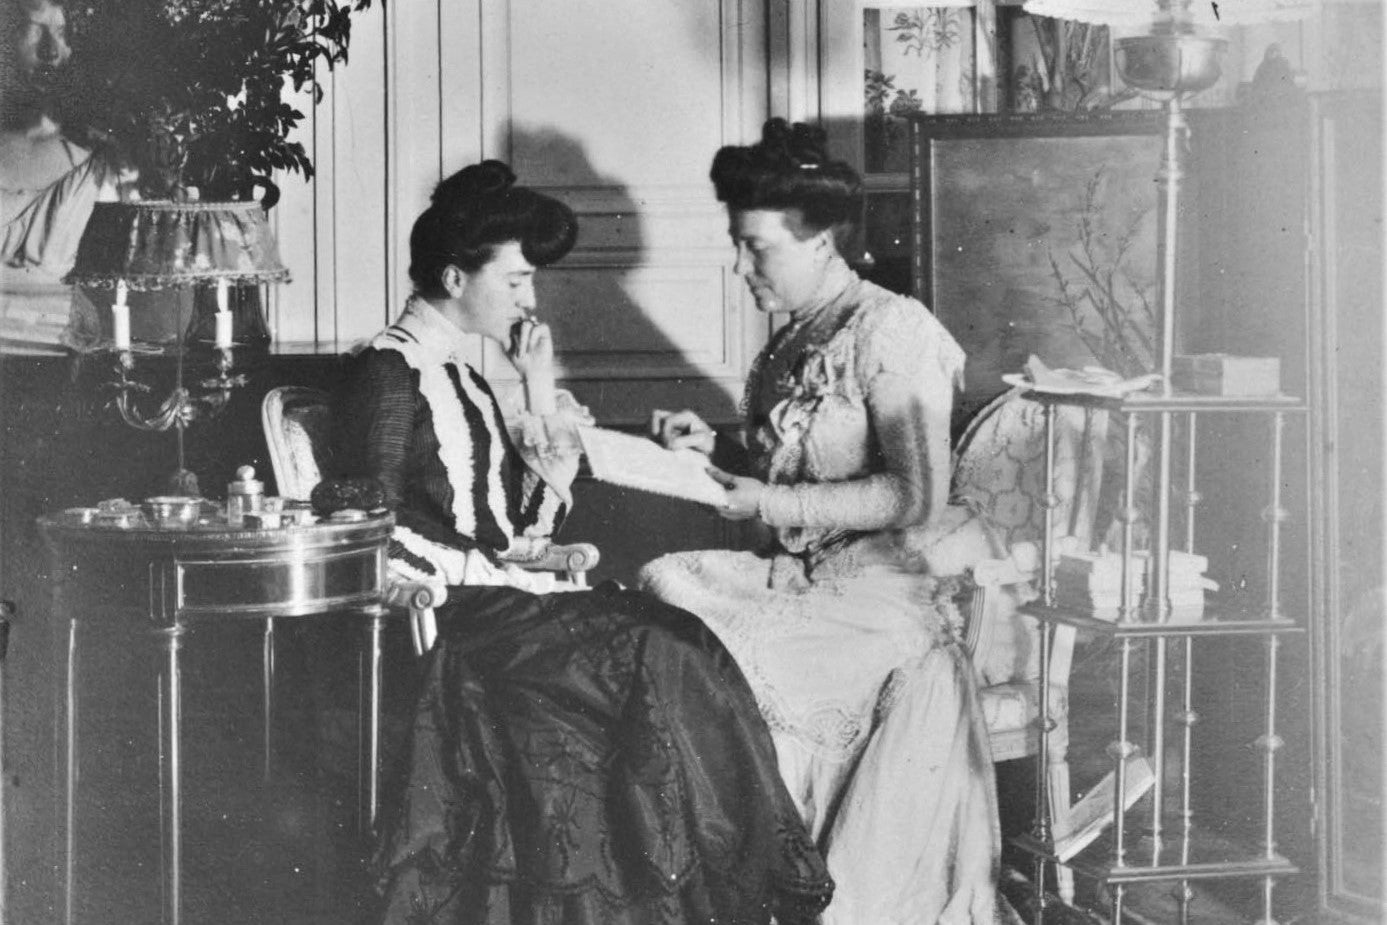 Edith and her eldest sister Susan doing needlework, ca. 1890 (cropped)